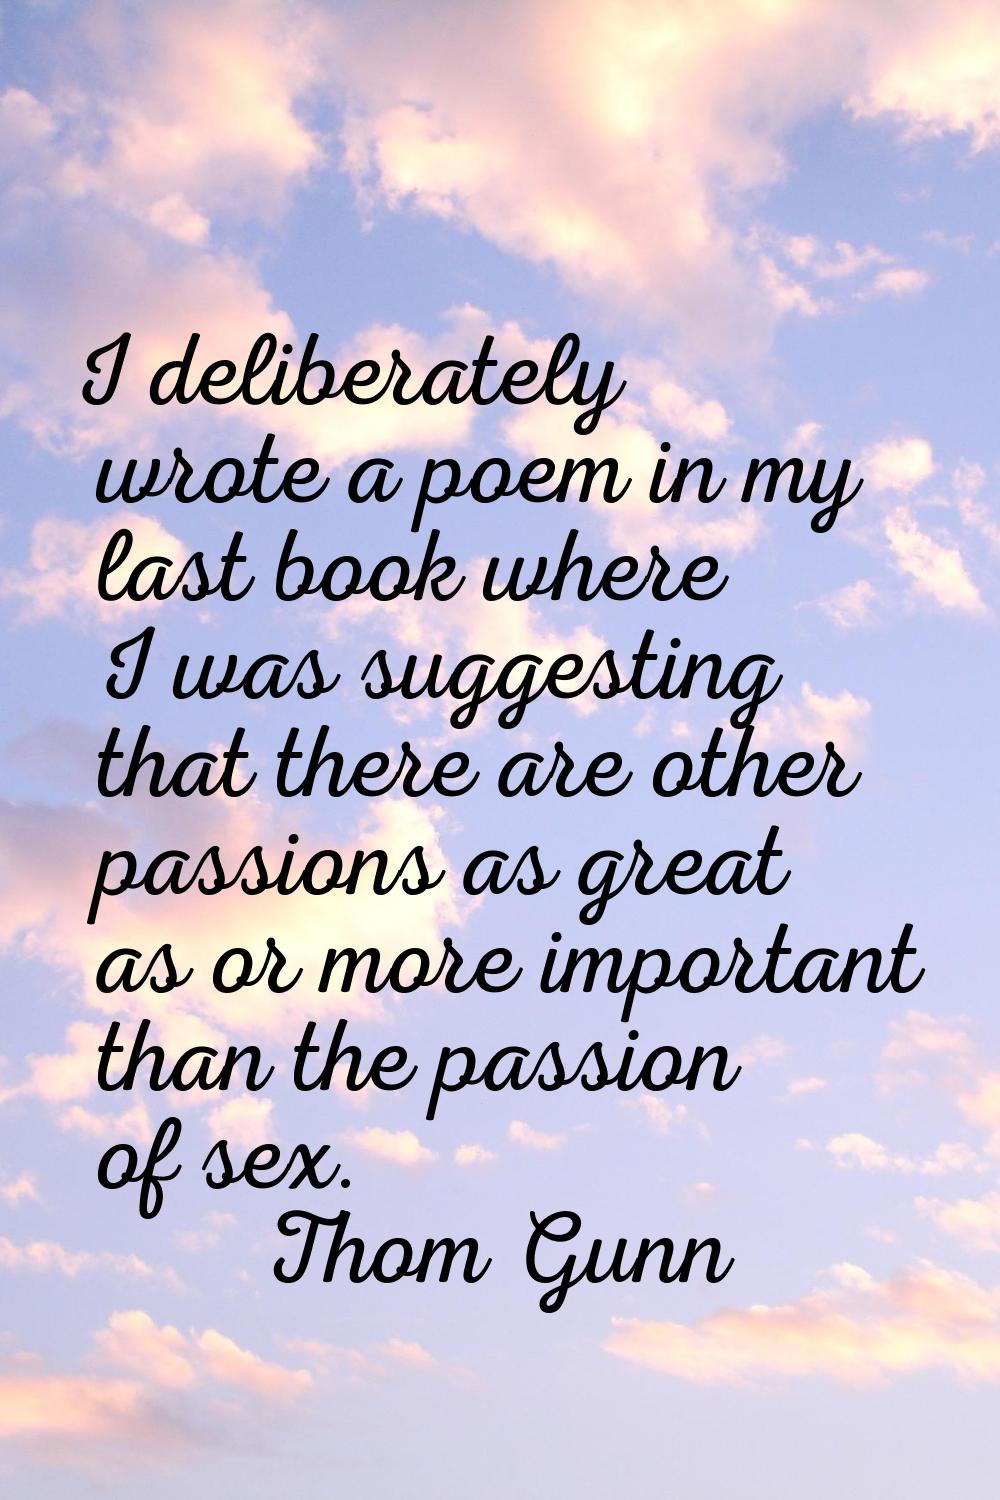 I deliberately wrote a poem in my last book where I was suggesting that there are other passions as